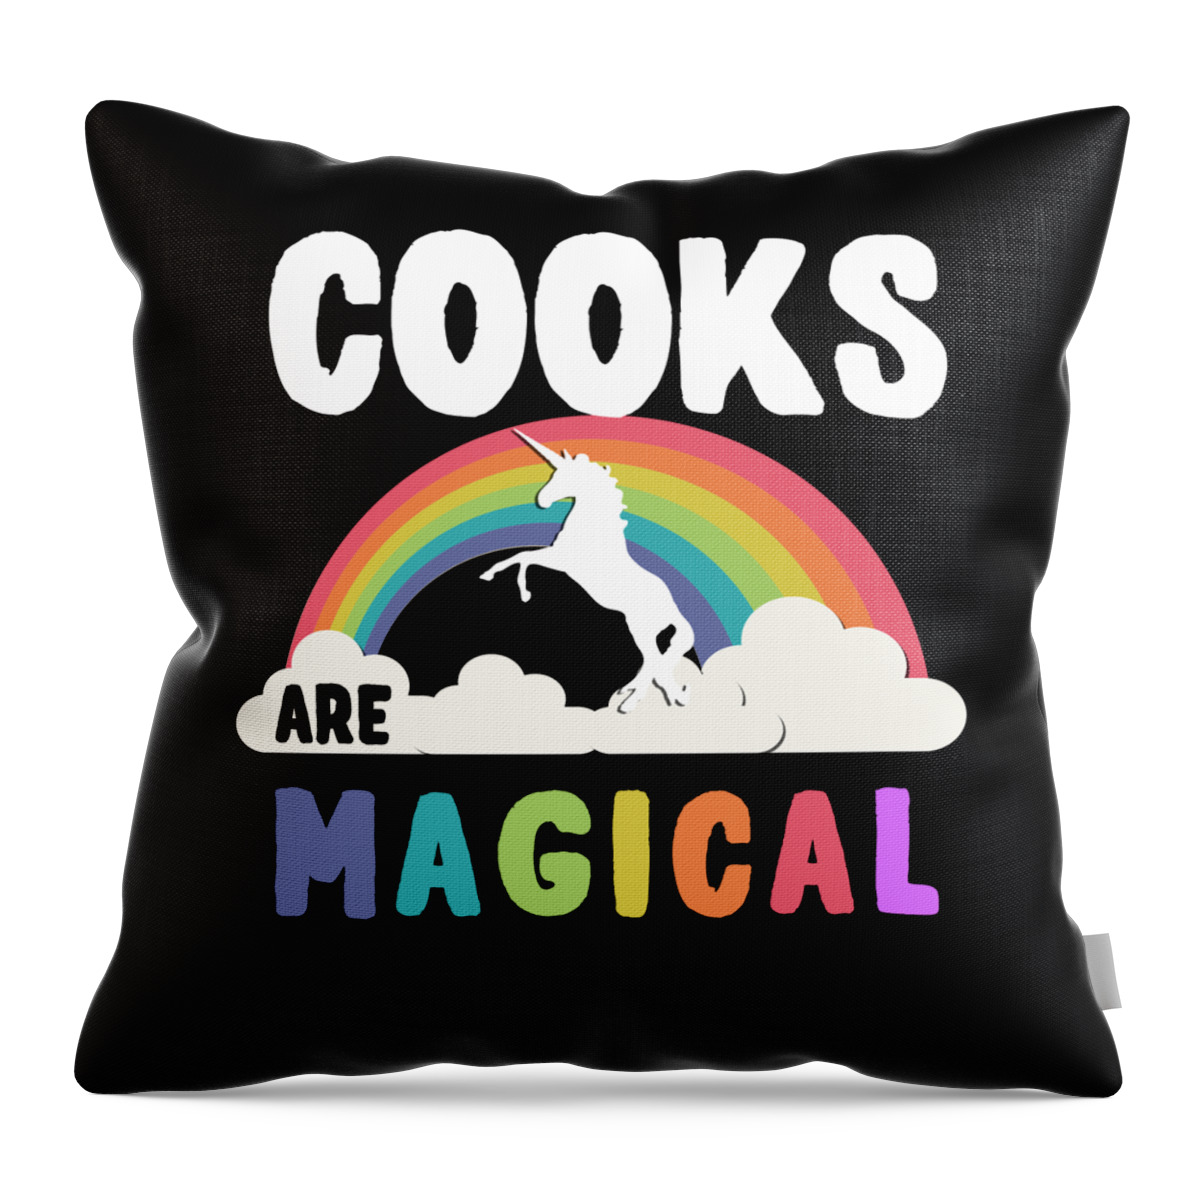 Funny Throw Pillow featuring the digital art Cooks Are Magical by Flippin Sweet Gear